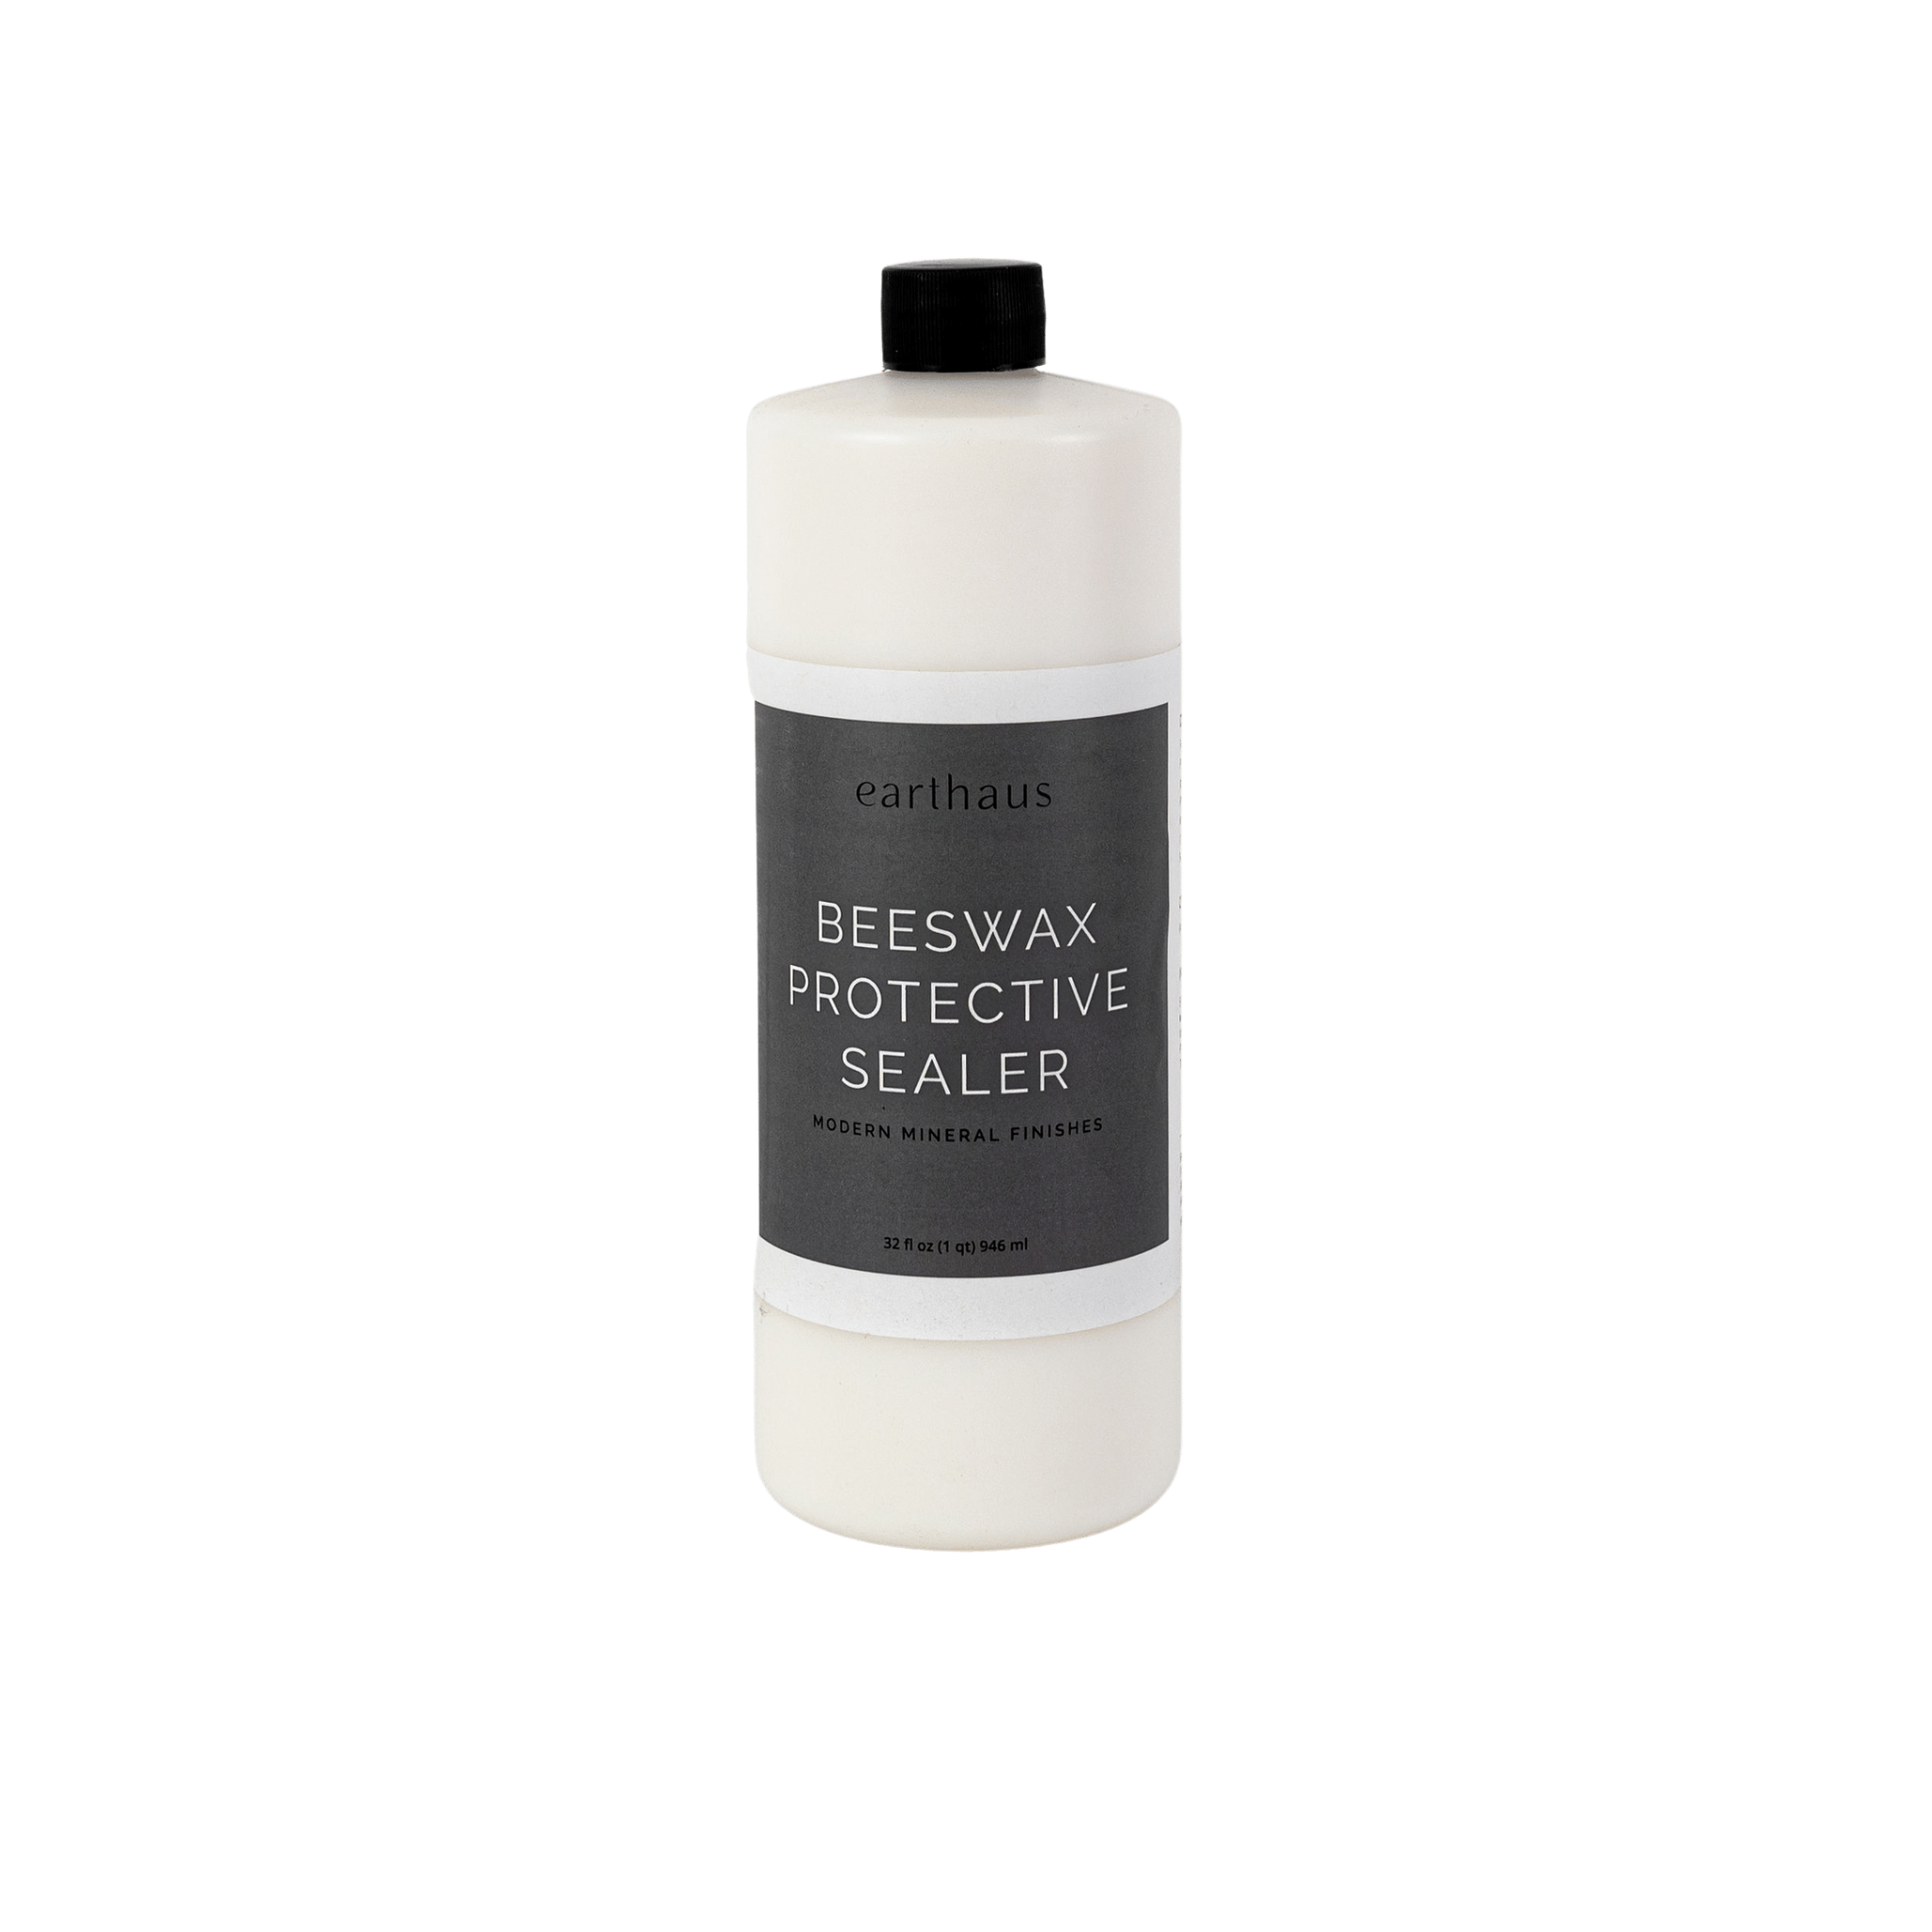 Beeswax Protective Sealer